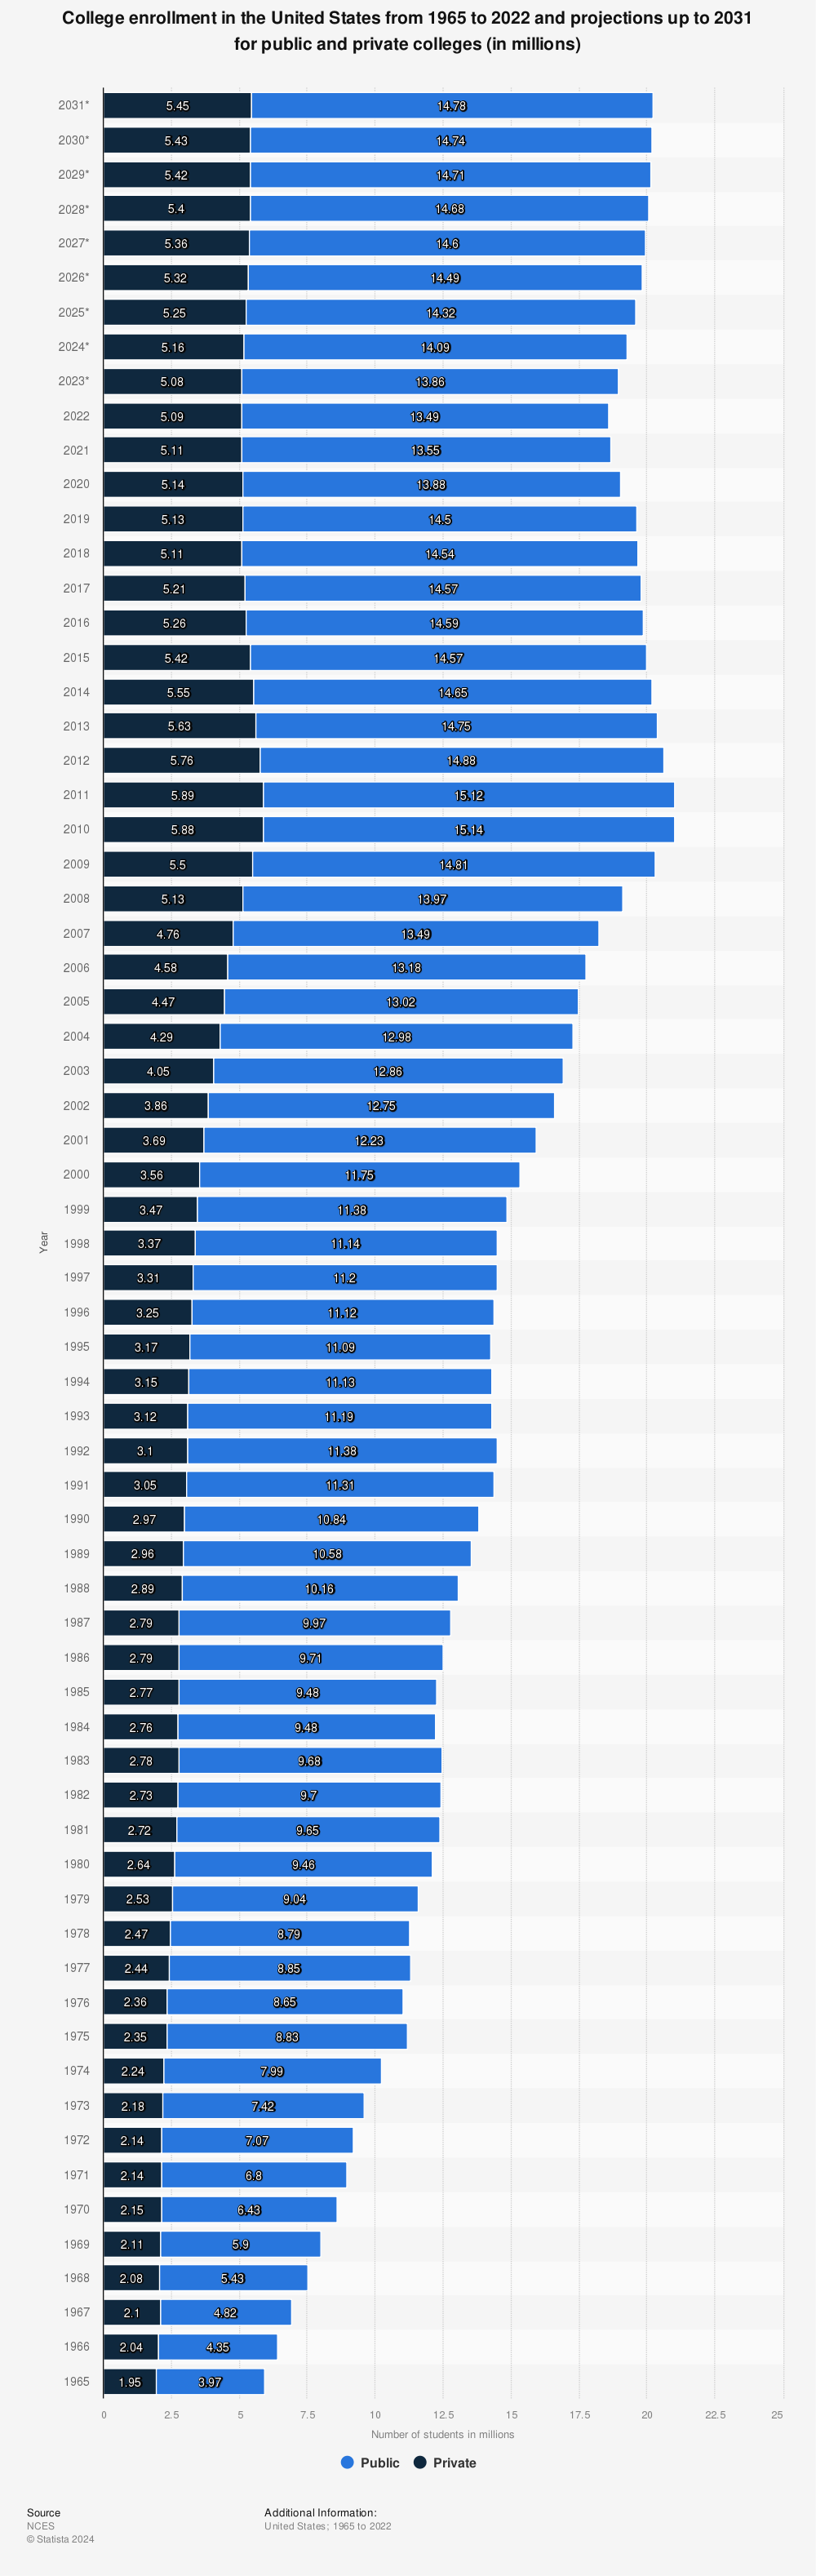 Statistic: College enrollment in the United States from 1965 to 2020 and projections up to 2031 for public and private colleges (in millions) | Statista